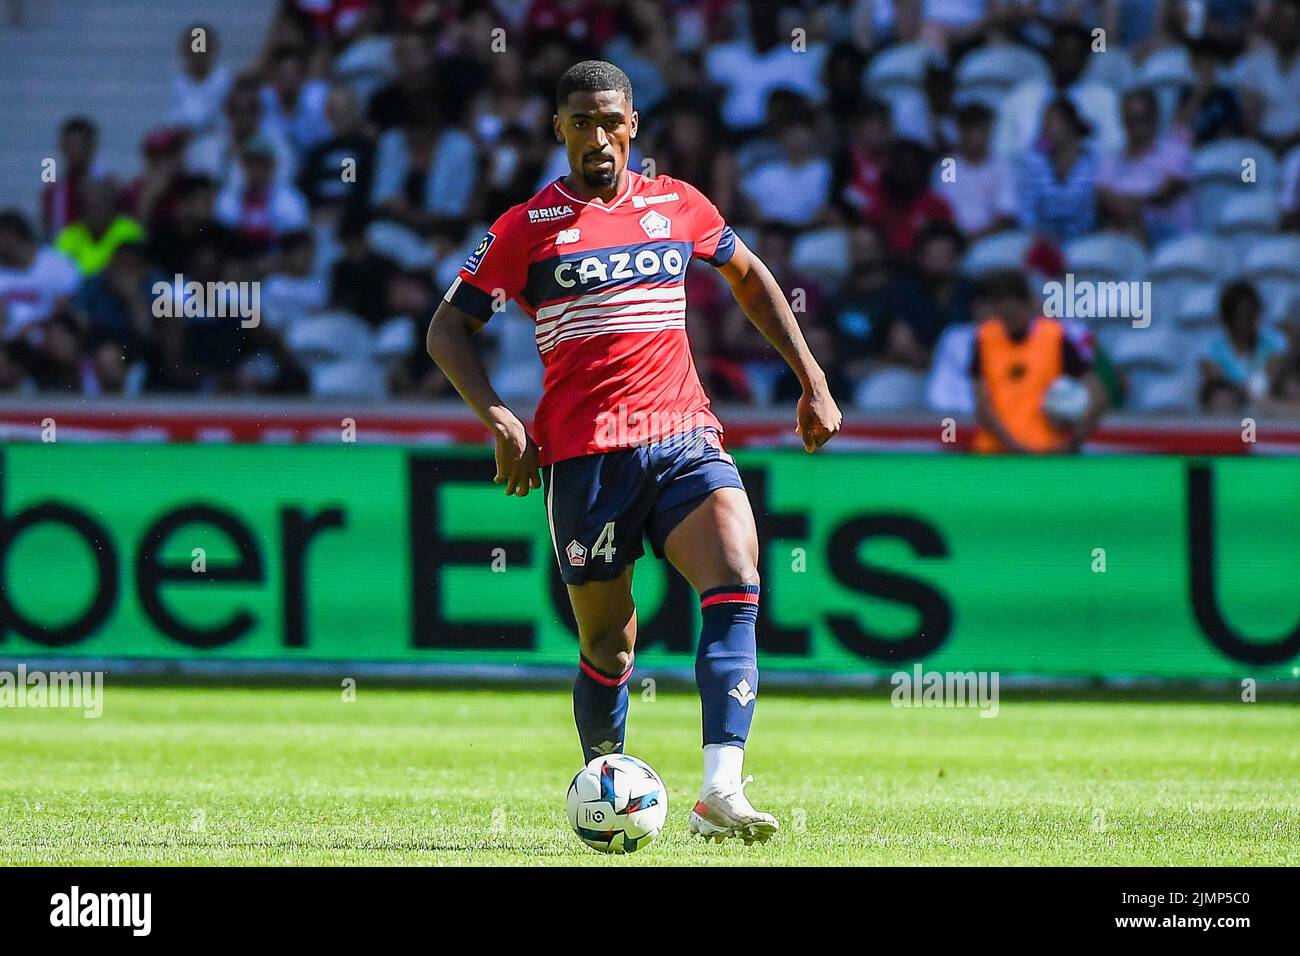 LILLE, FRANCE - AUGUST 7: Alexsandro Ribeiro of Lille during the French Ligue 1 match between Lille and Auxerre at Stade Pierre Mauroy on August 7, 2022 in Lille, France (Photo by Matthieu Mirville/Orange Pictures) Stock Photo